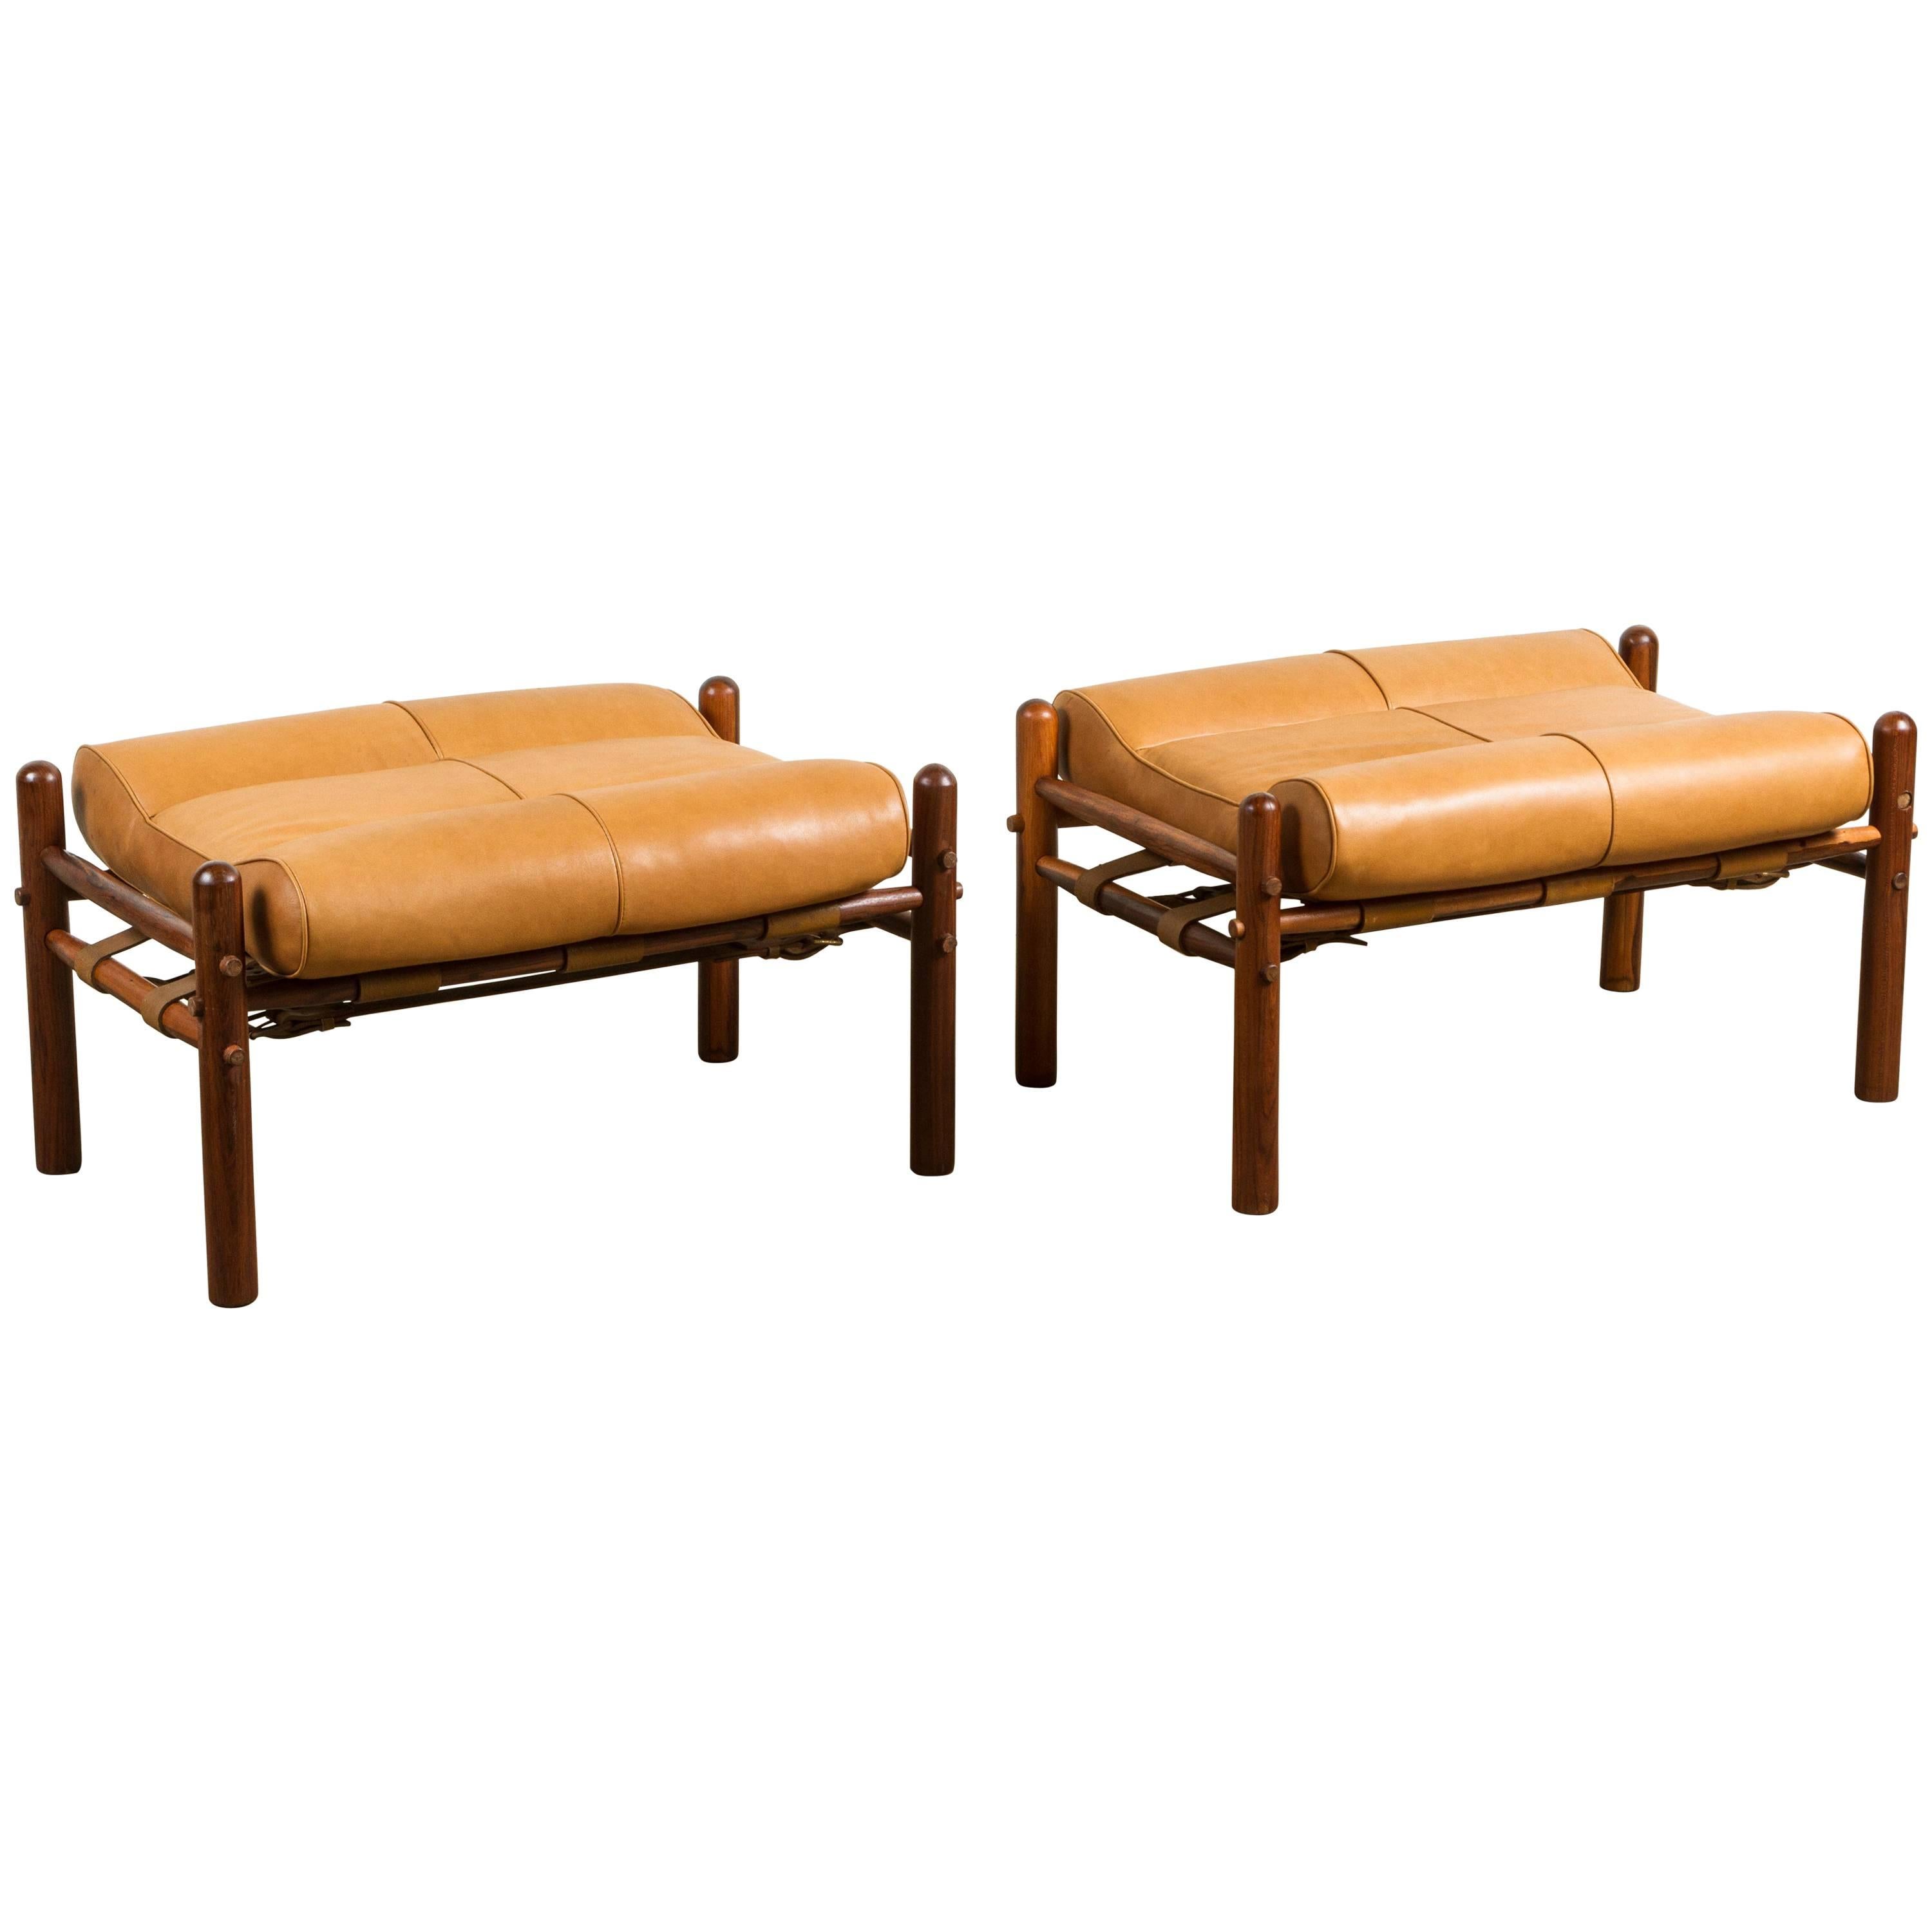 Pair of "Inca" Easy Chair Footstools by Arne Norell